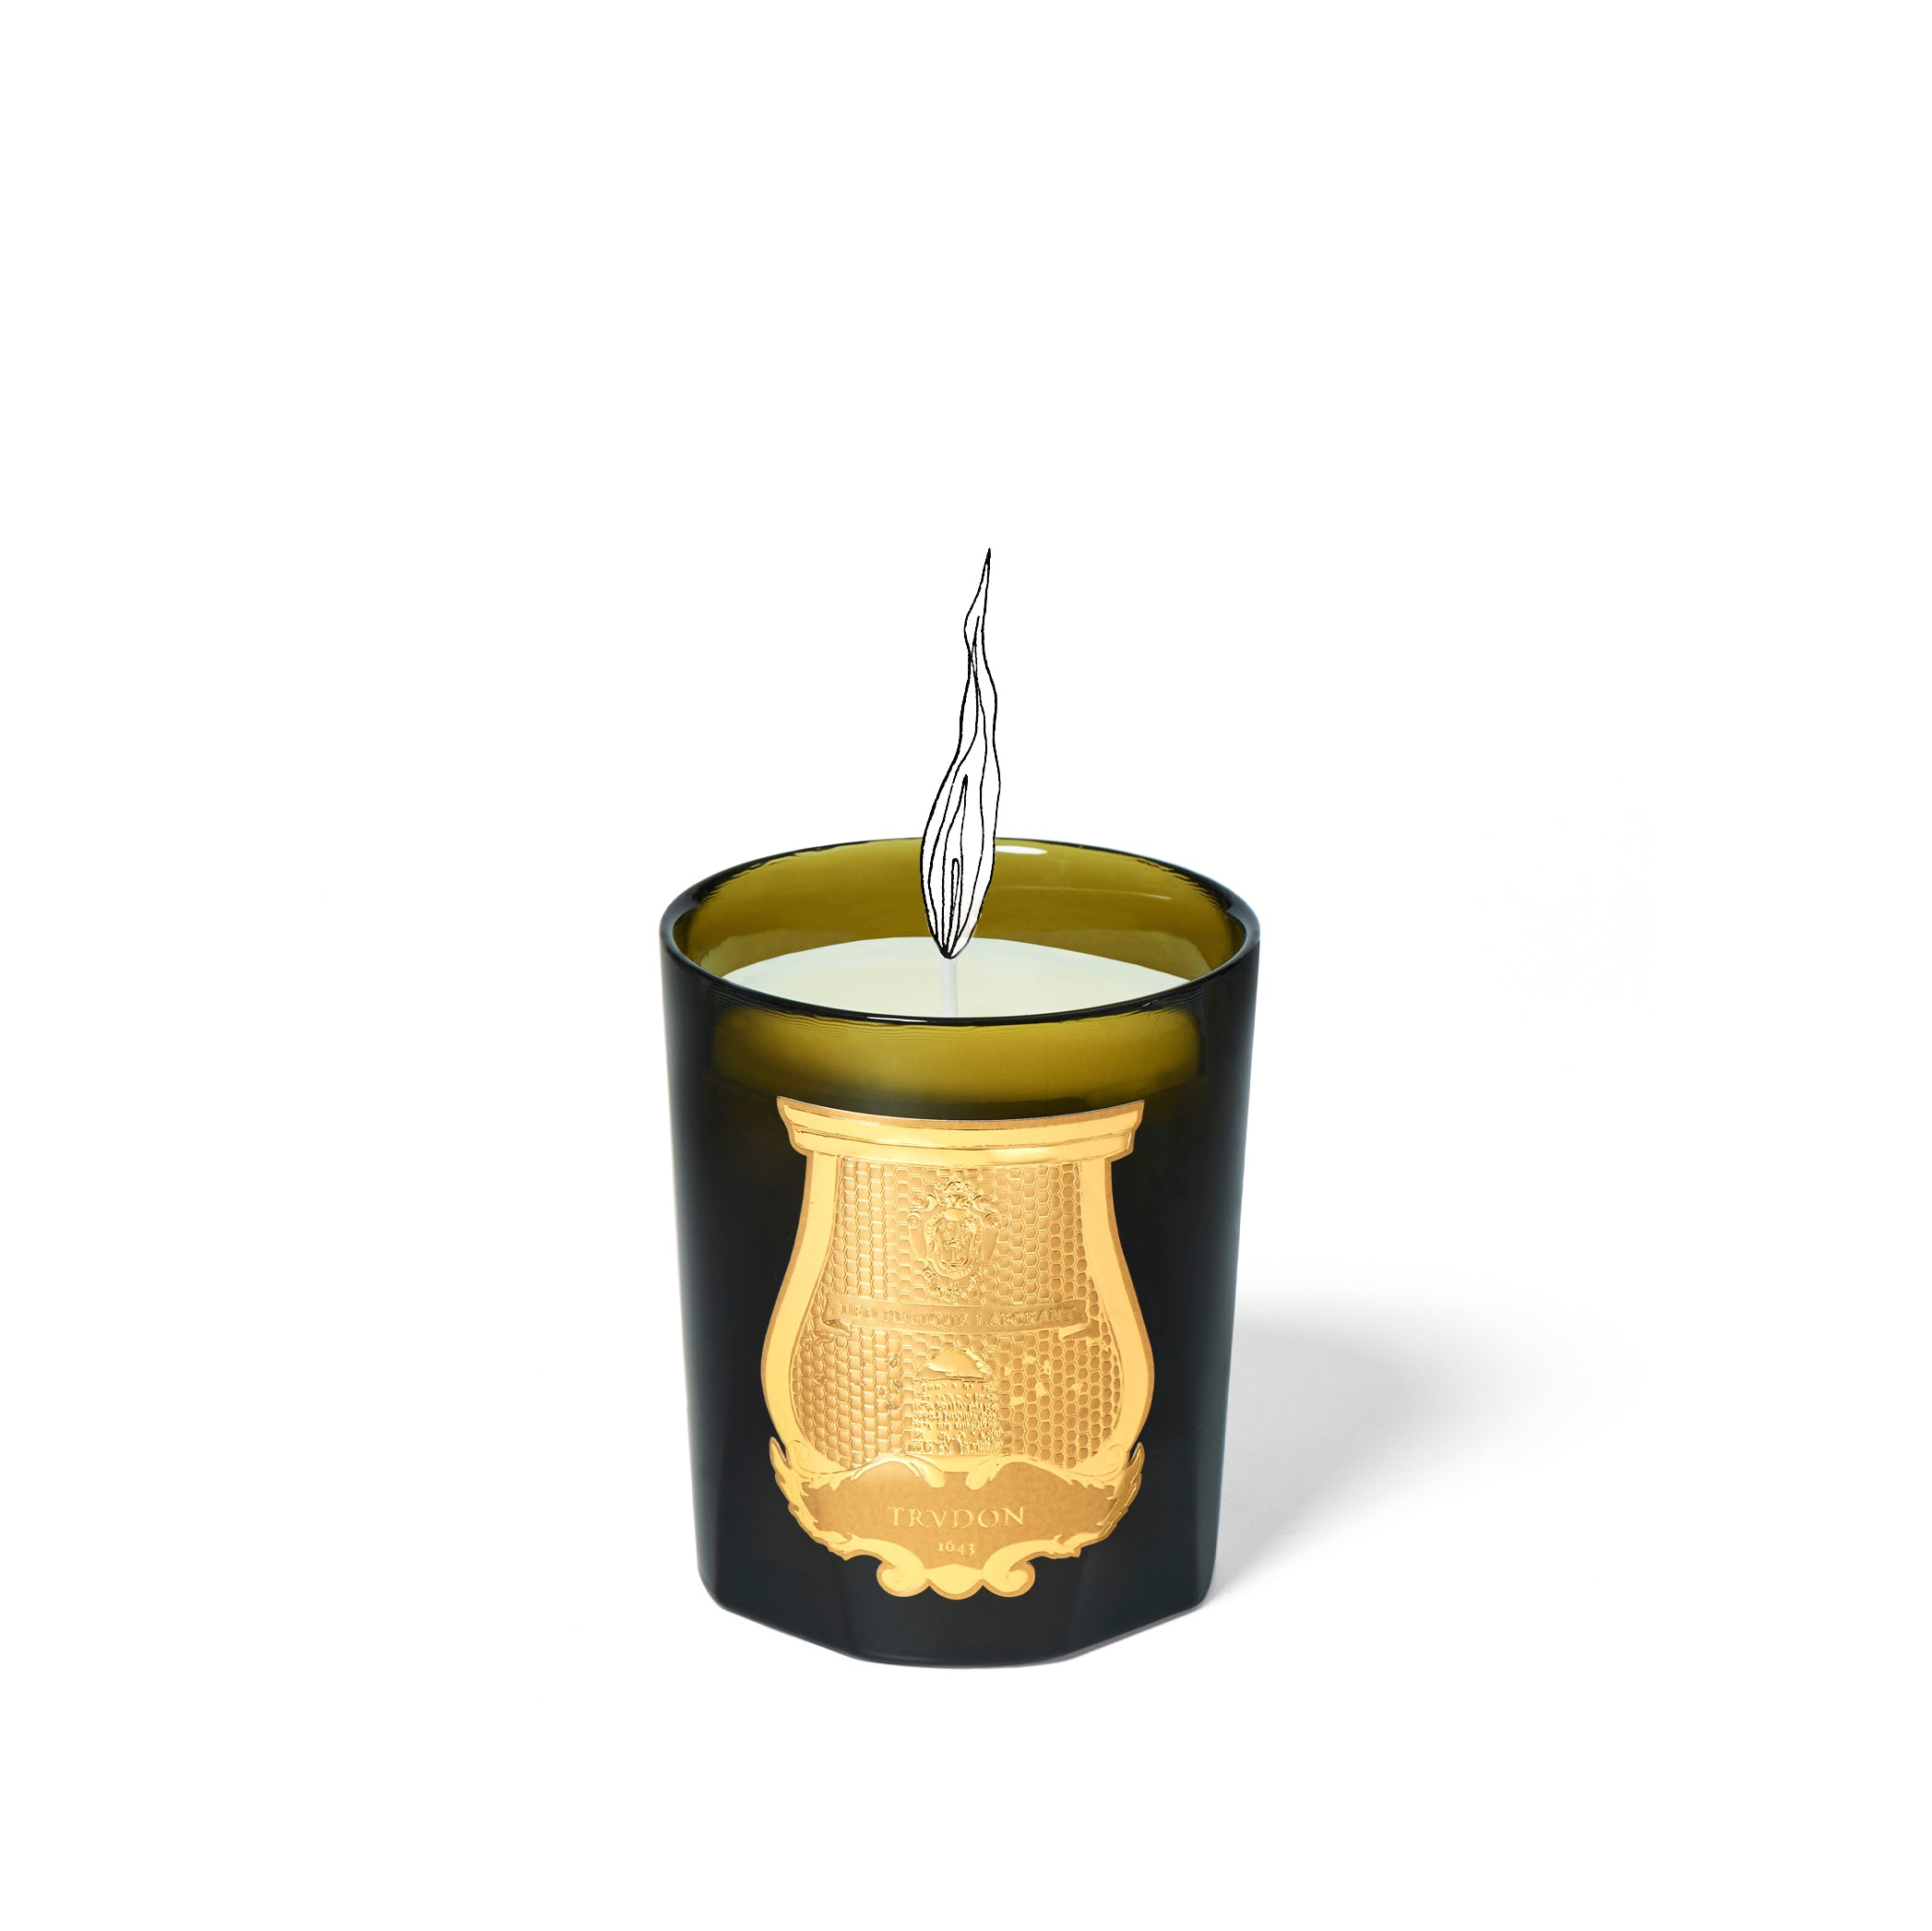 Classic Candle 'Gabriel' by Trudon, 270g